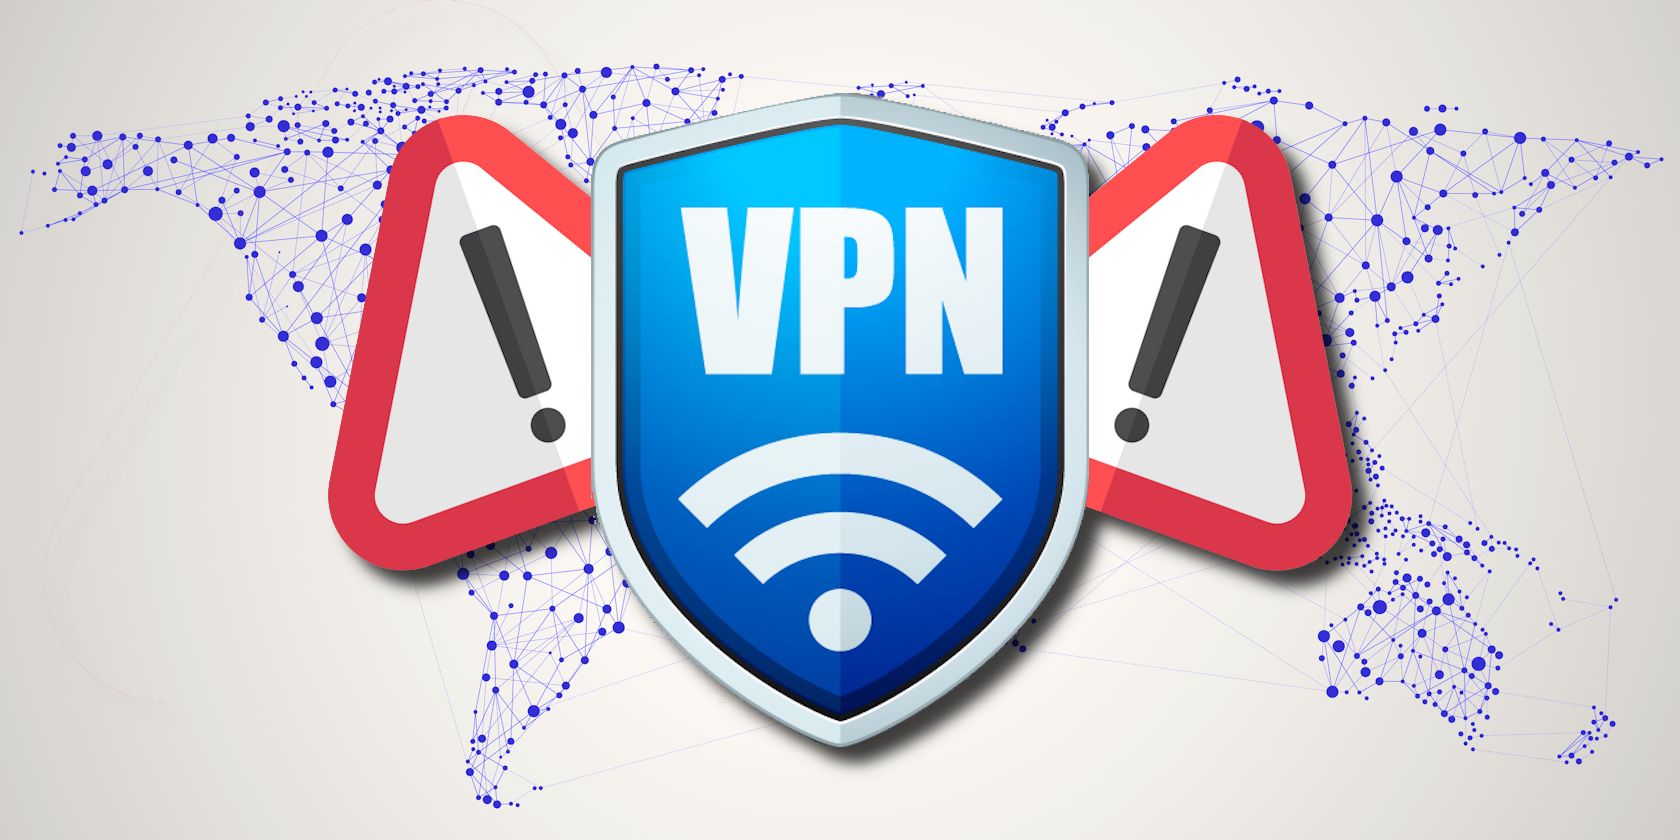 vpn shield with warning signs on world map network connection background